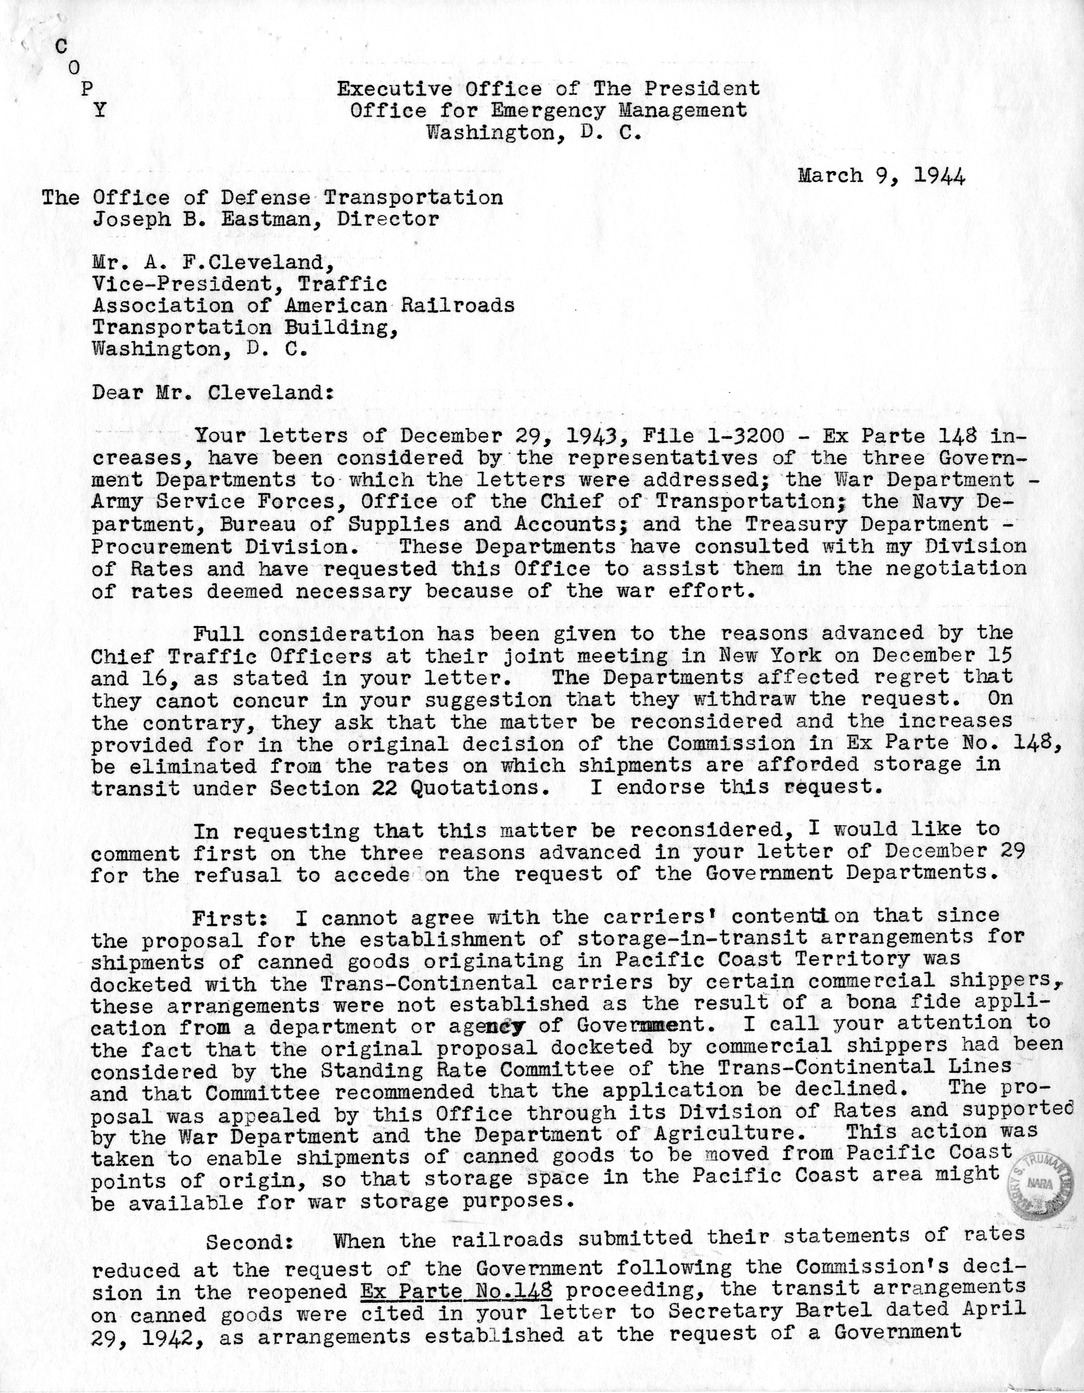 Memorandum from Harold D. Smith to M. C. Latta, H.R. 694, To Amend Section 321, Title III, Part II, Transportation Act of 1940, with Respect to the Movement of Government Traffic, with Attachments